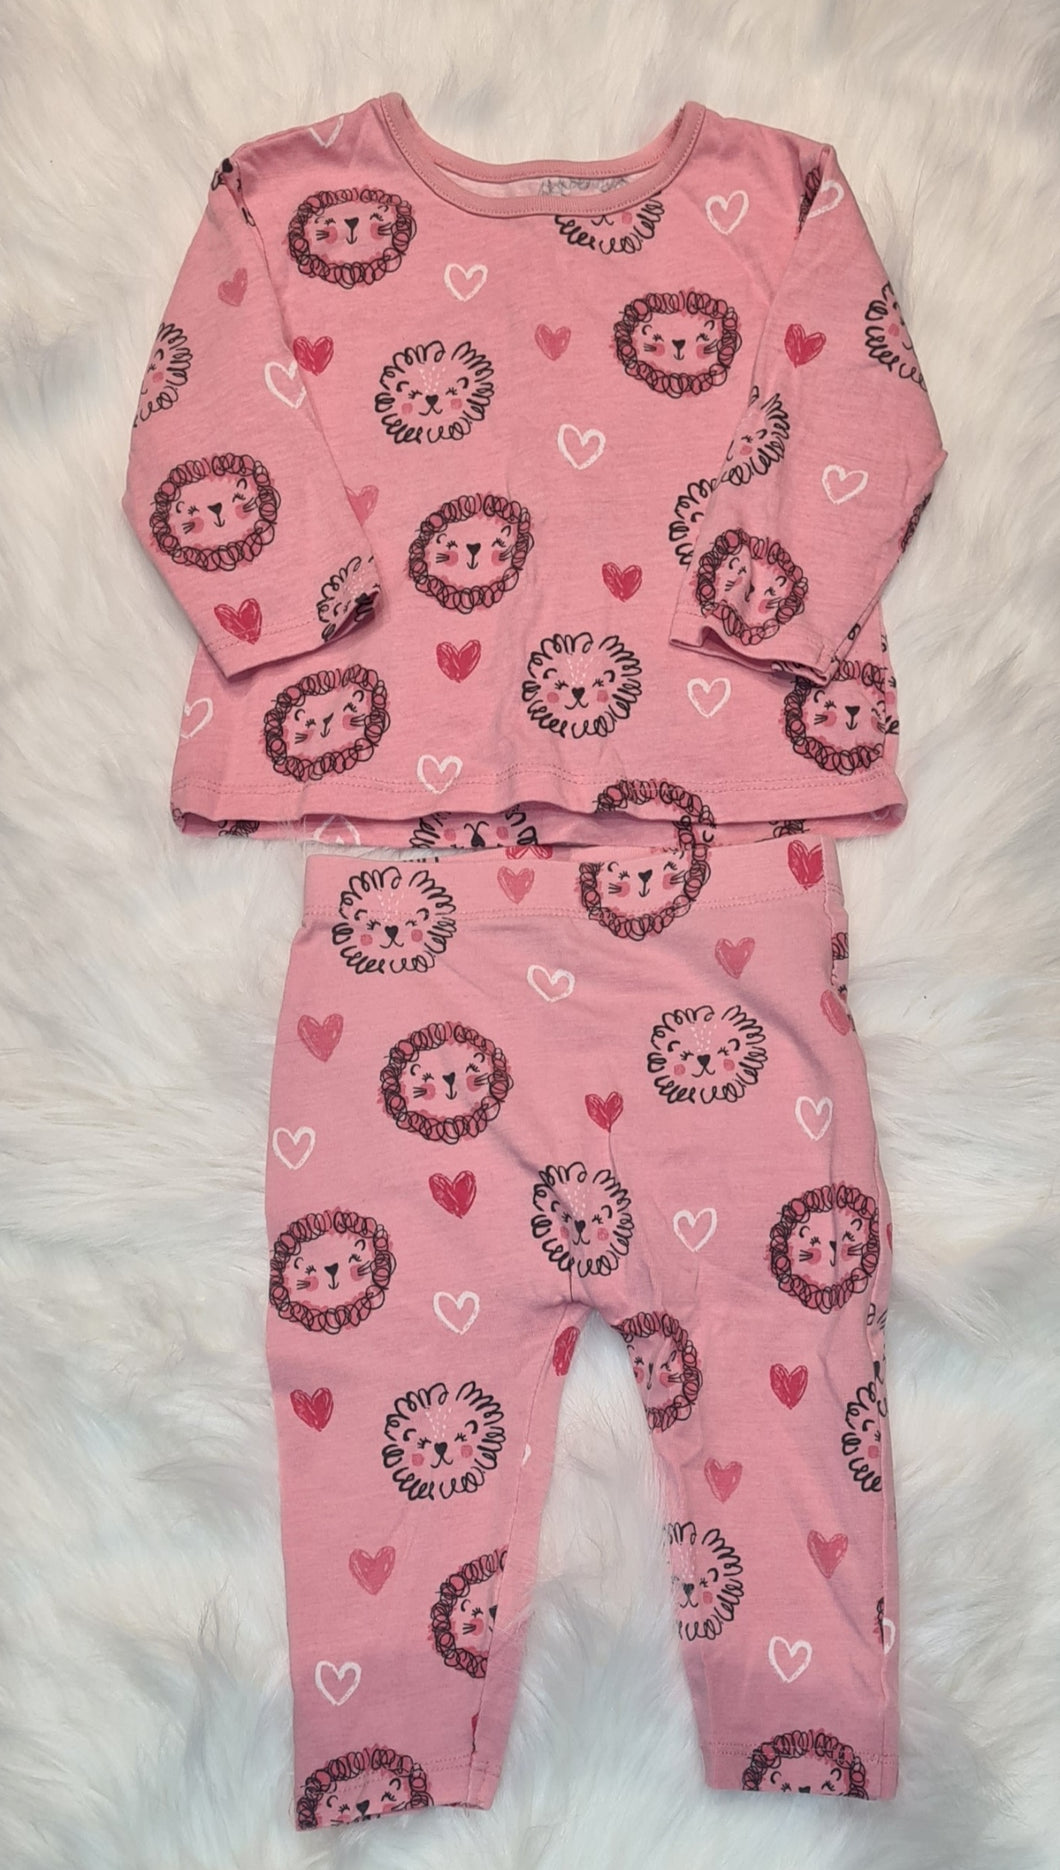 Girls 3-6 Months - Pink Lion - Top and Leggings Set